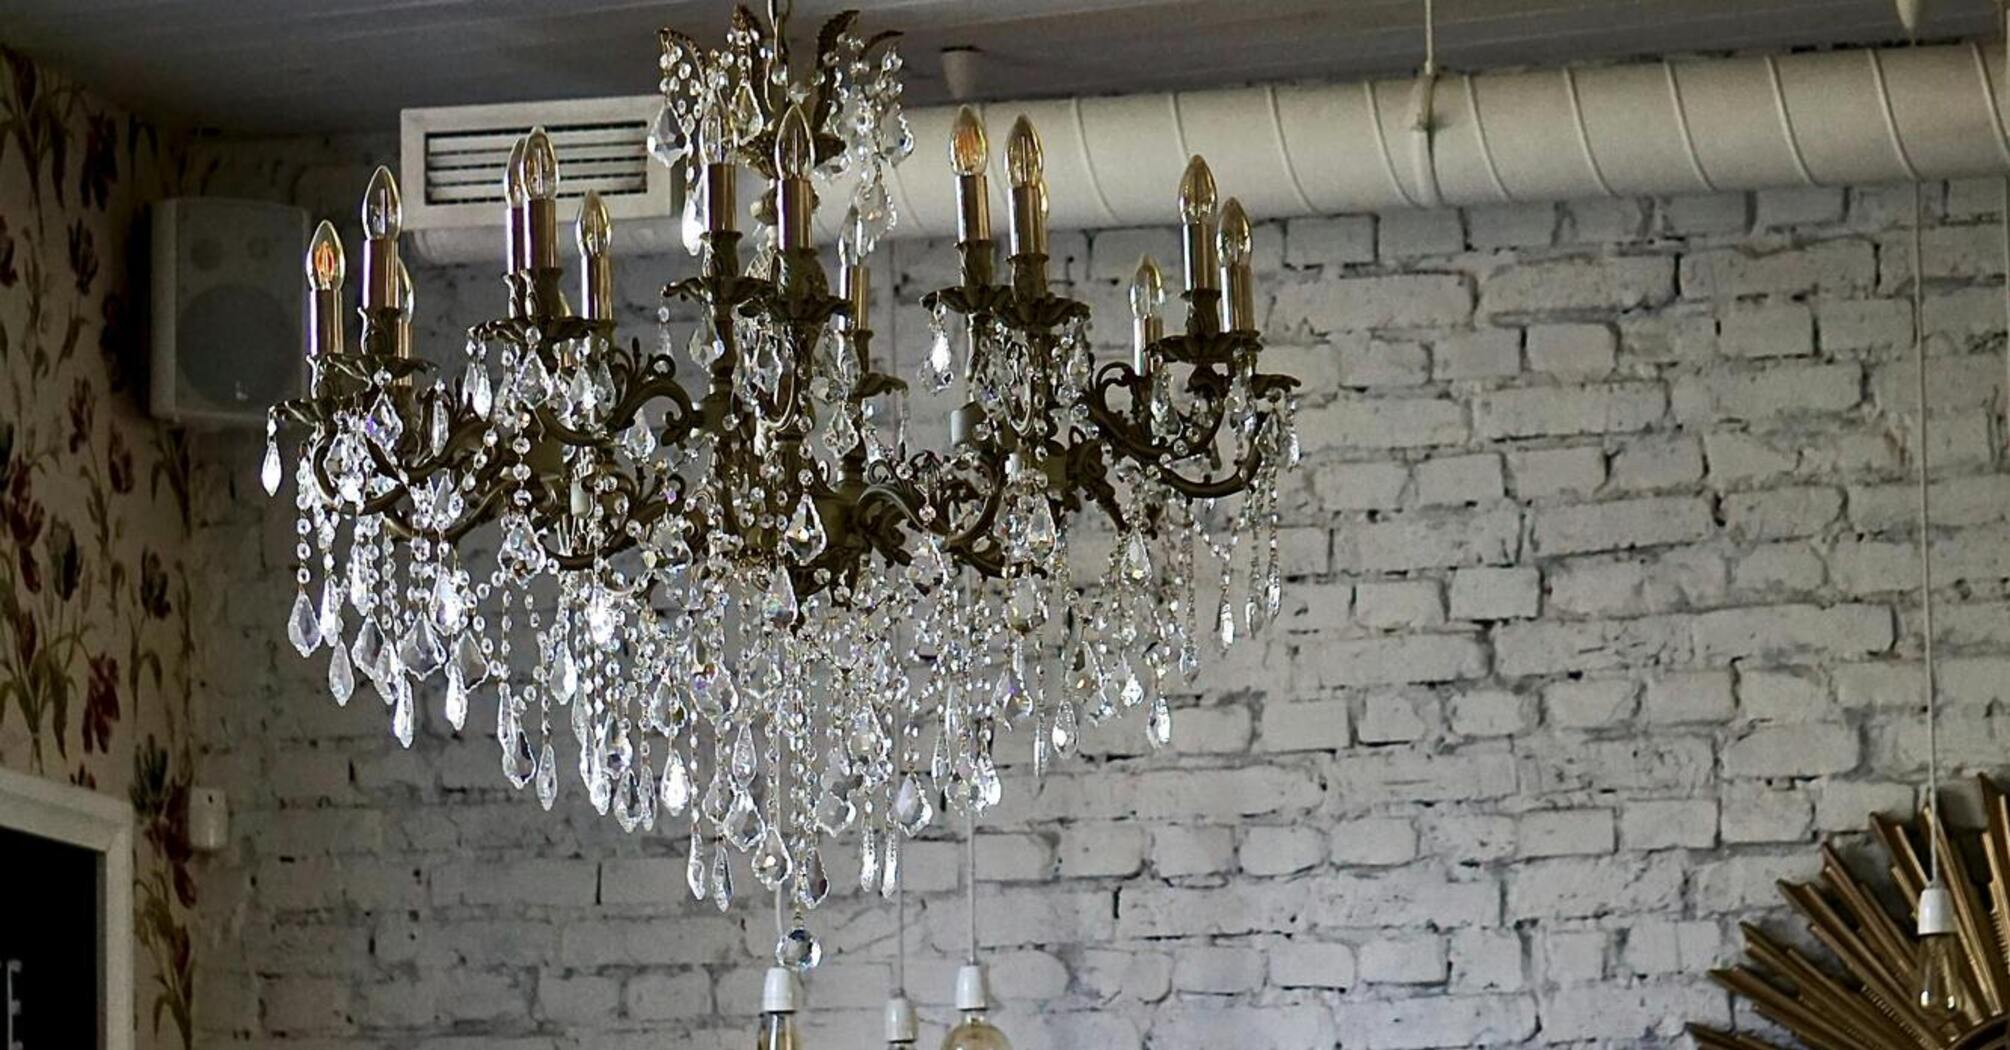 How to clean a crystal chandelier?